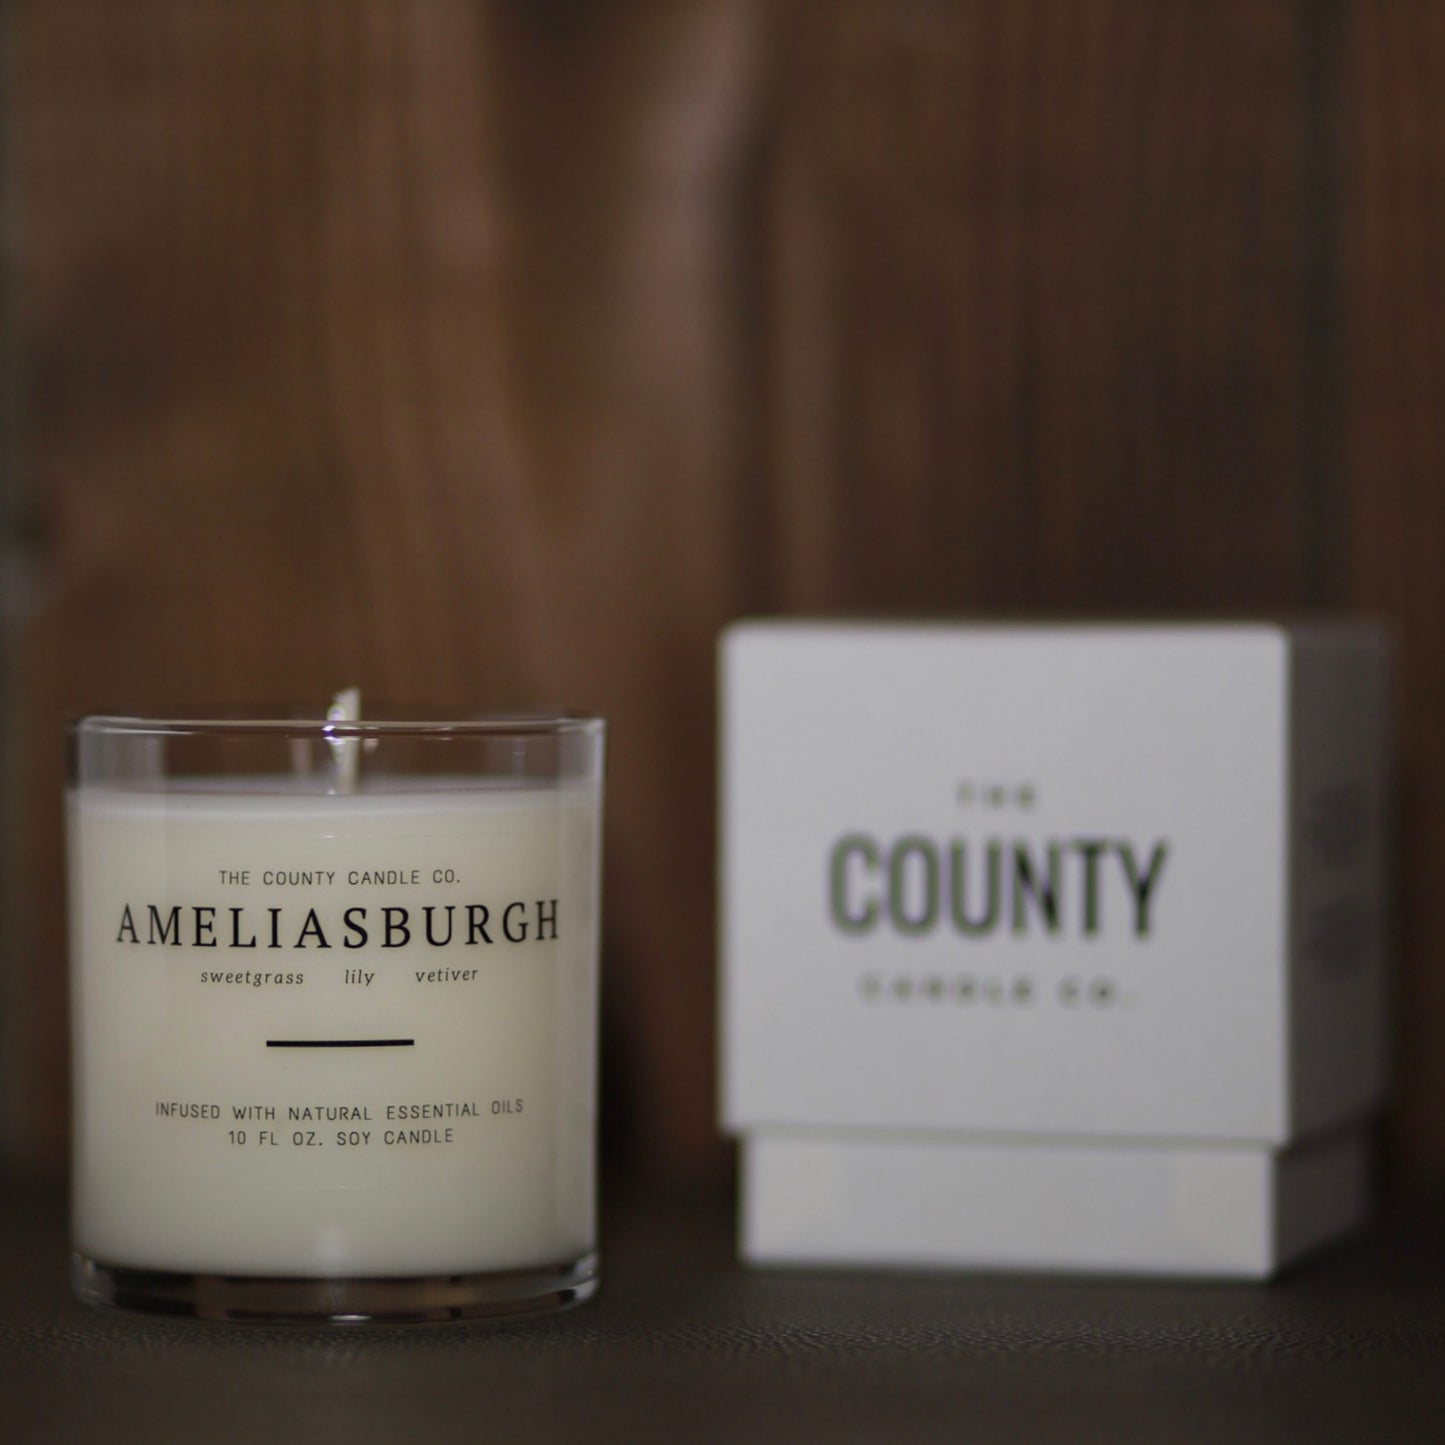 Ameliasburgh | The County Candle Co.